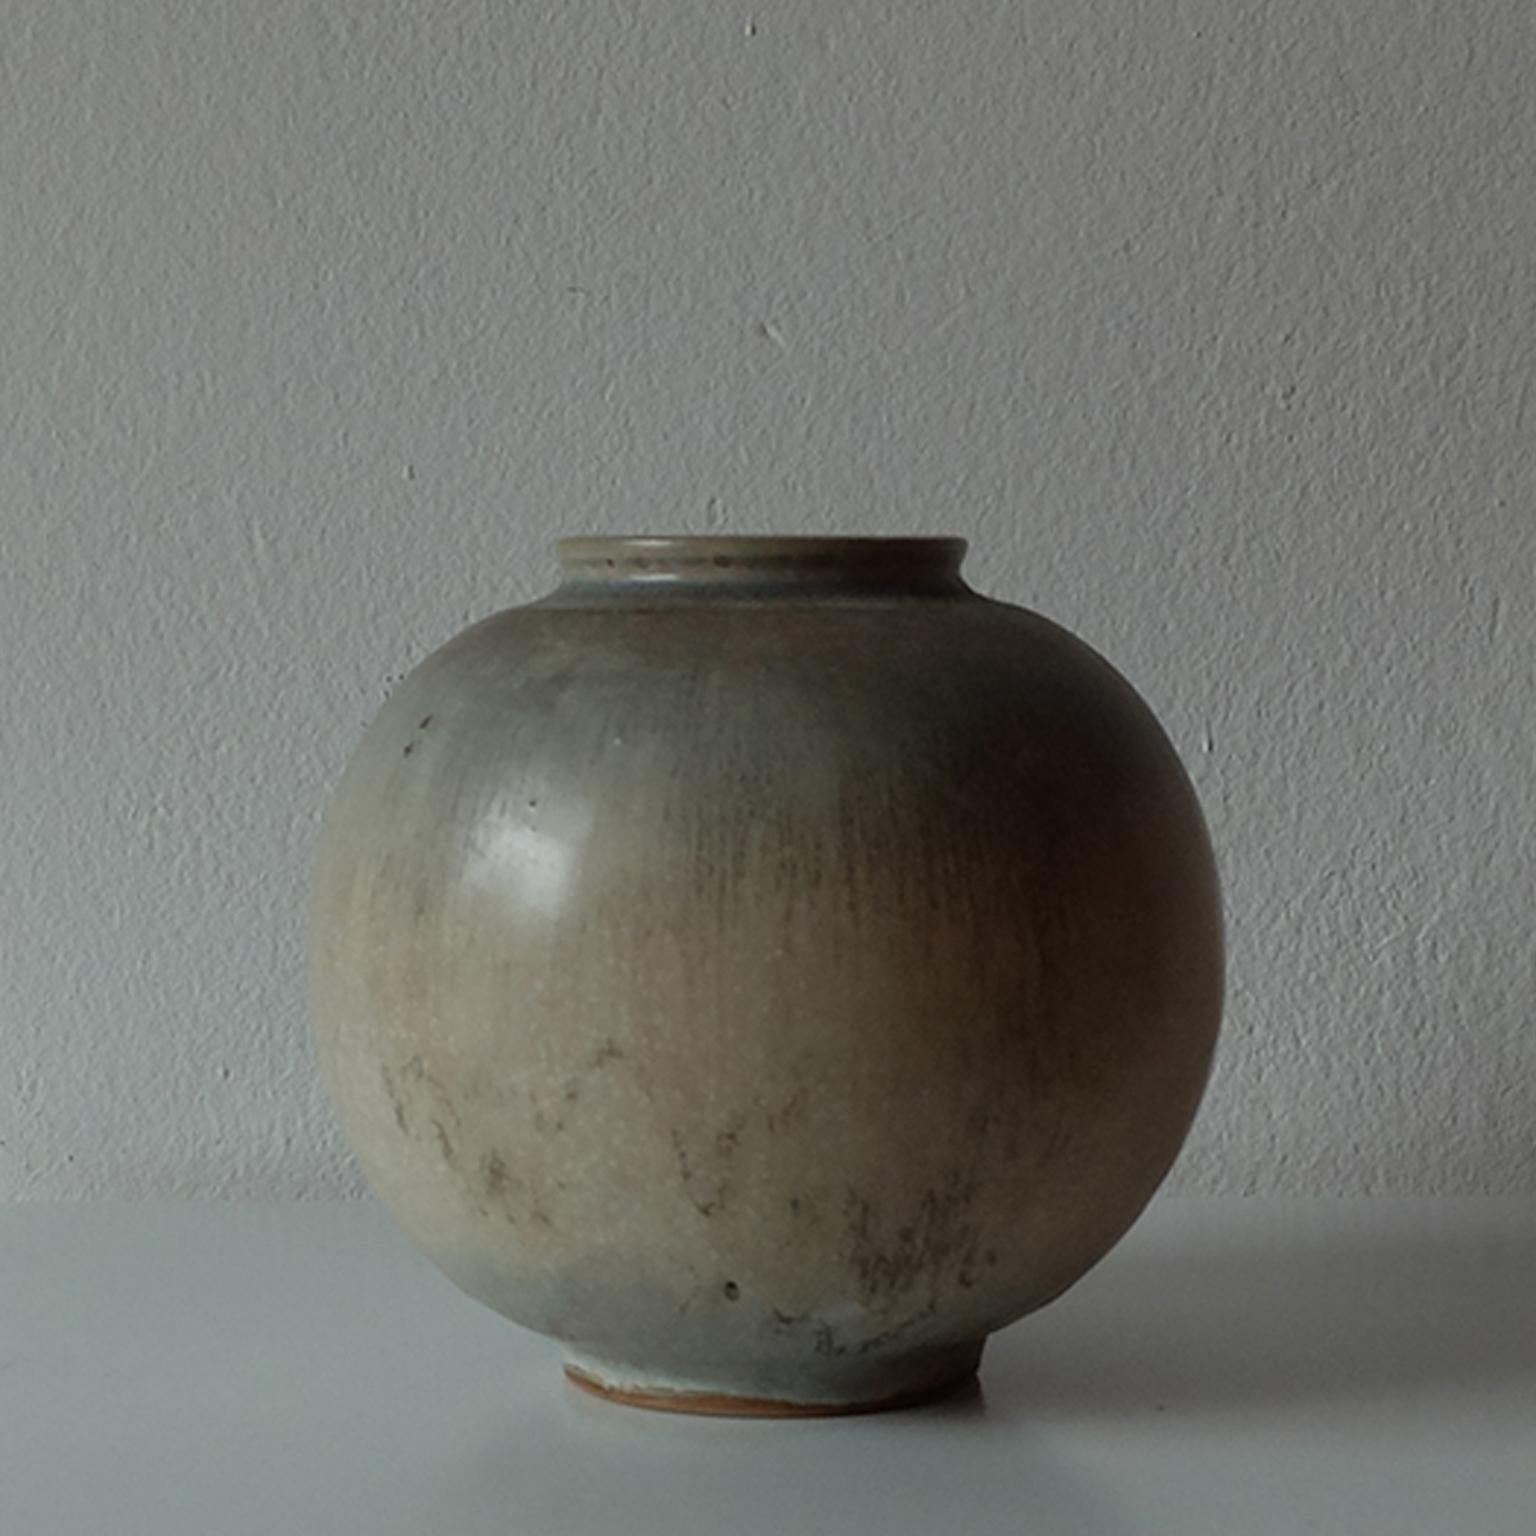 Nils Thorsson for Royal Copenhagen, Glazed ceramic vase, 1940s.

The surfaces of this beautiful spherical vase are covered in a multi-colored glaze with serene and earthy colors, recalling of the astounding Scandinavian's landscapes. Simple yet